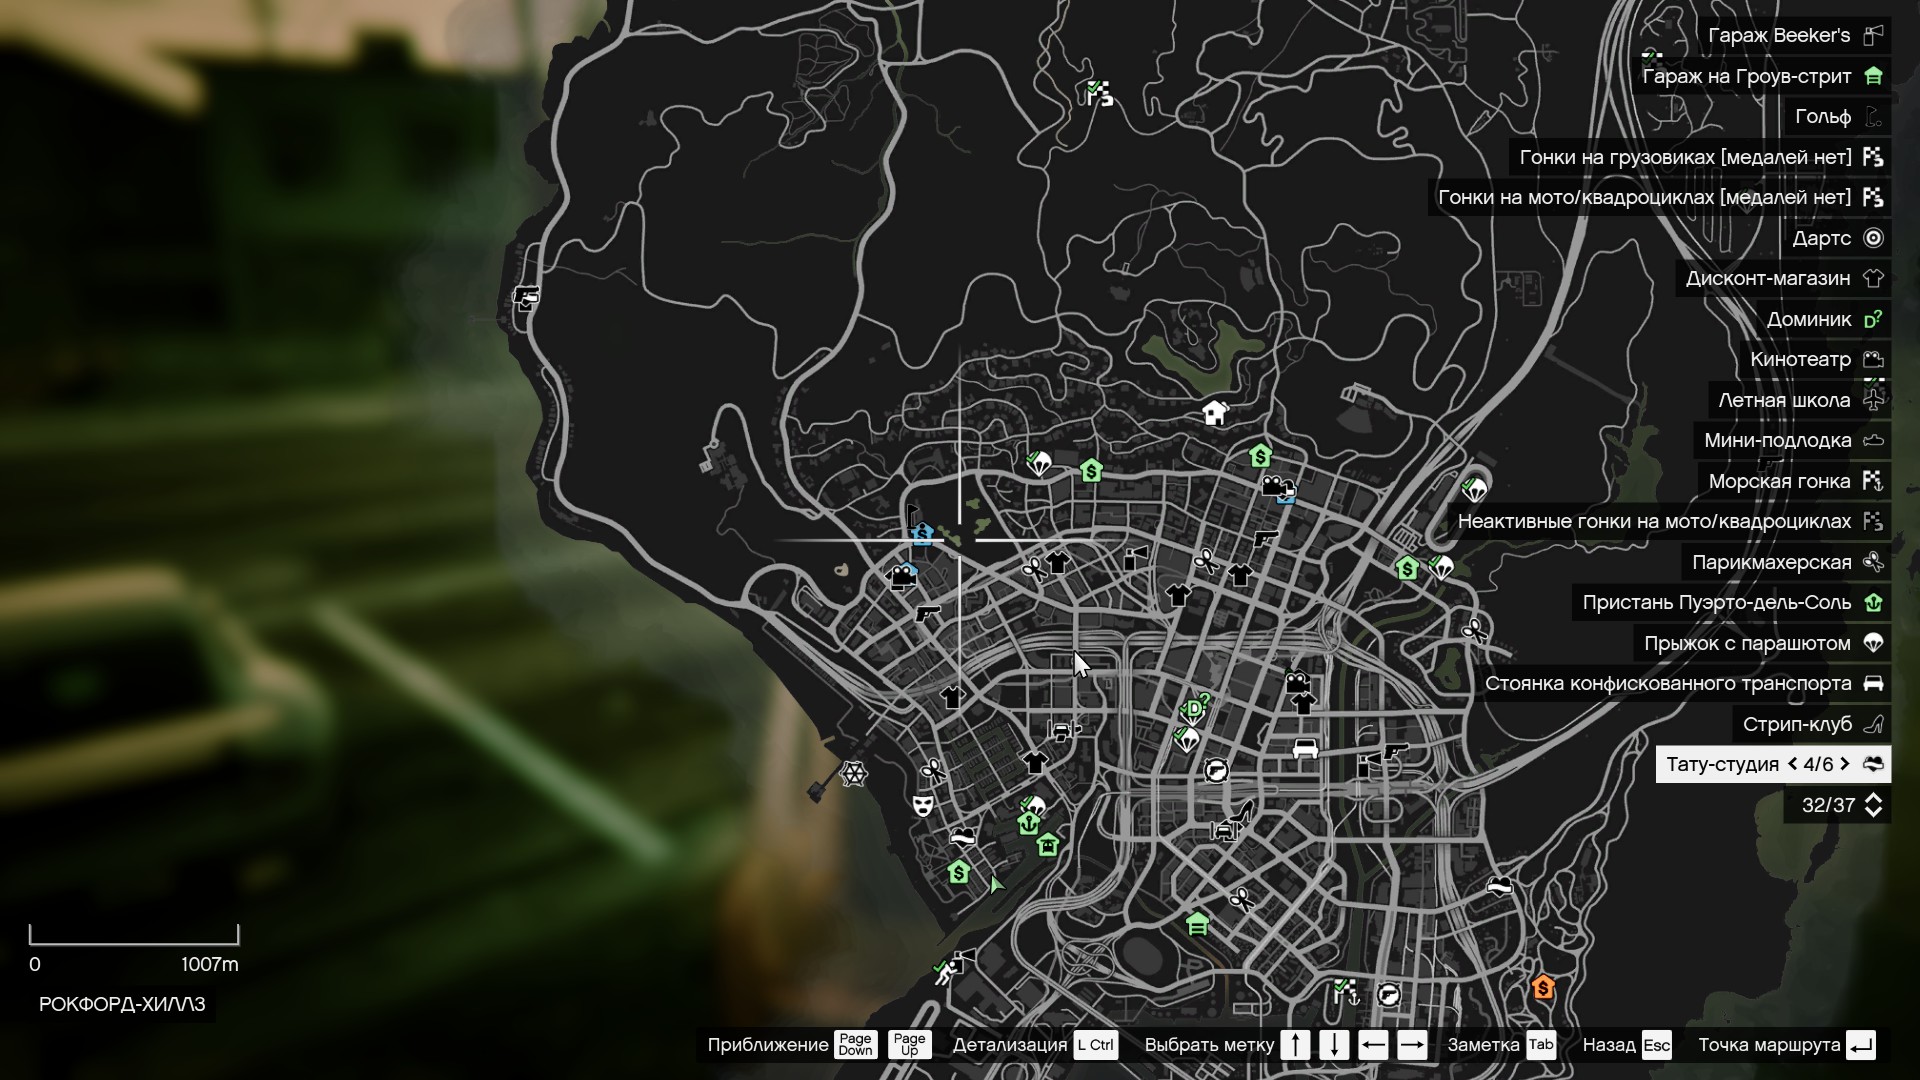 Grand Theft Auto V Completion Guide - Playthrough - Collect 50 pieces of a spaceship, 2 part - 4CA8FEA